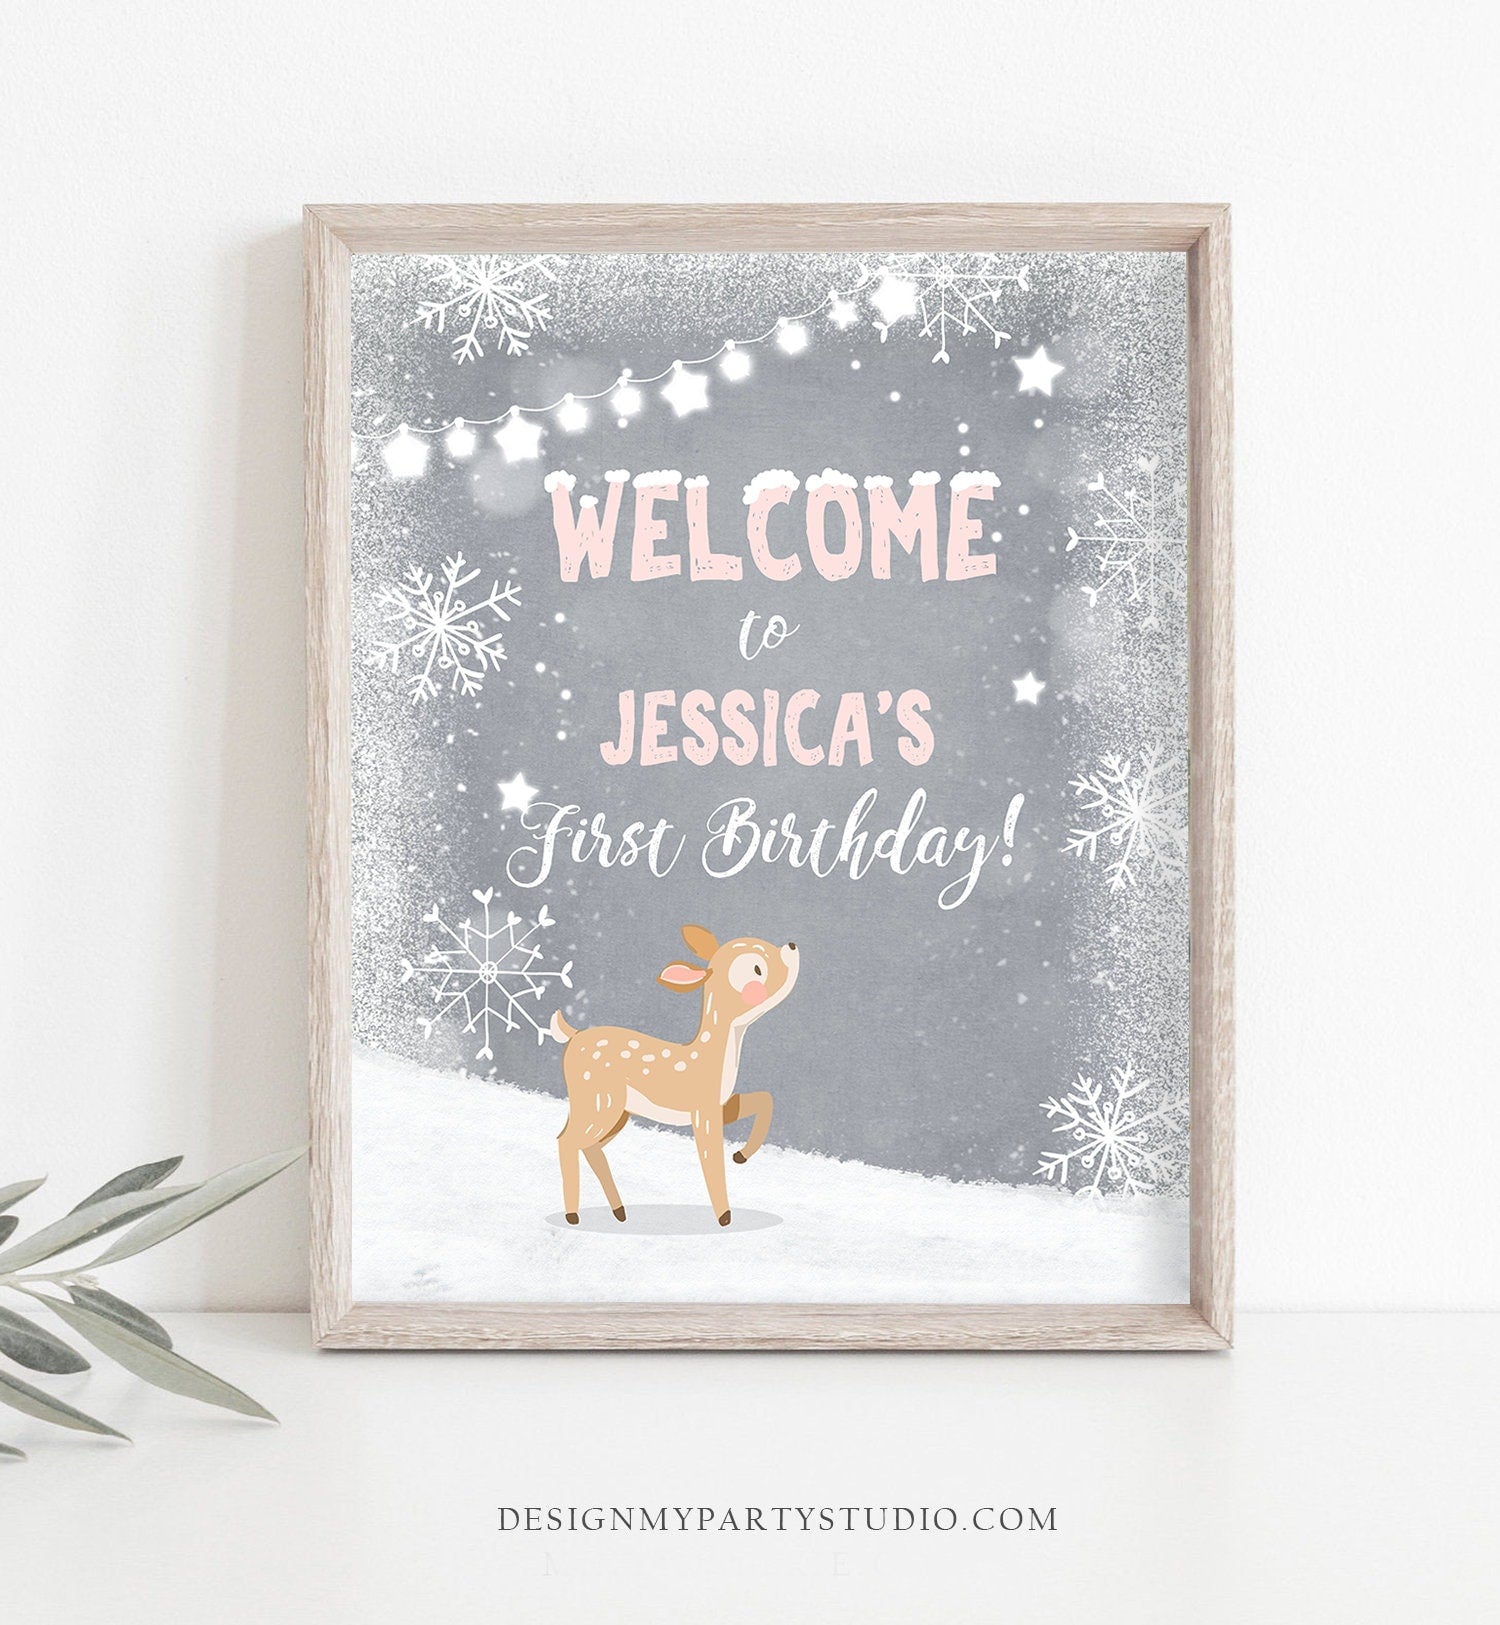 Editable Winter Birthday Welcome Sign Winter Onederland Decorations Girl Pink Deer Woodland Snowflakes Snow Template PRINTABLE Corjl 0109